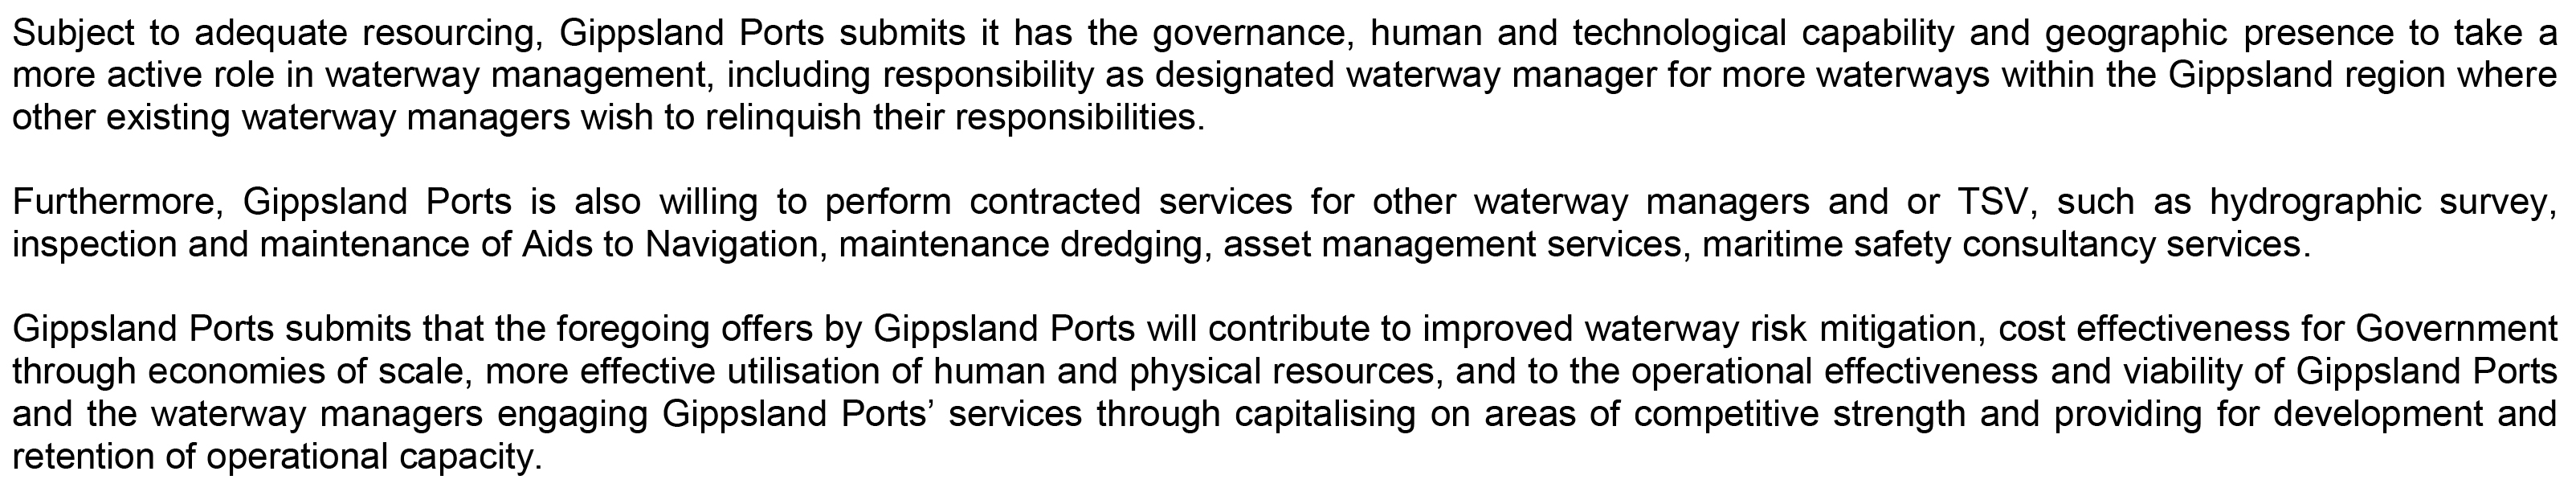 RESPONSE provided by the Chief Executive Officer, Gippsland Ports.